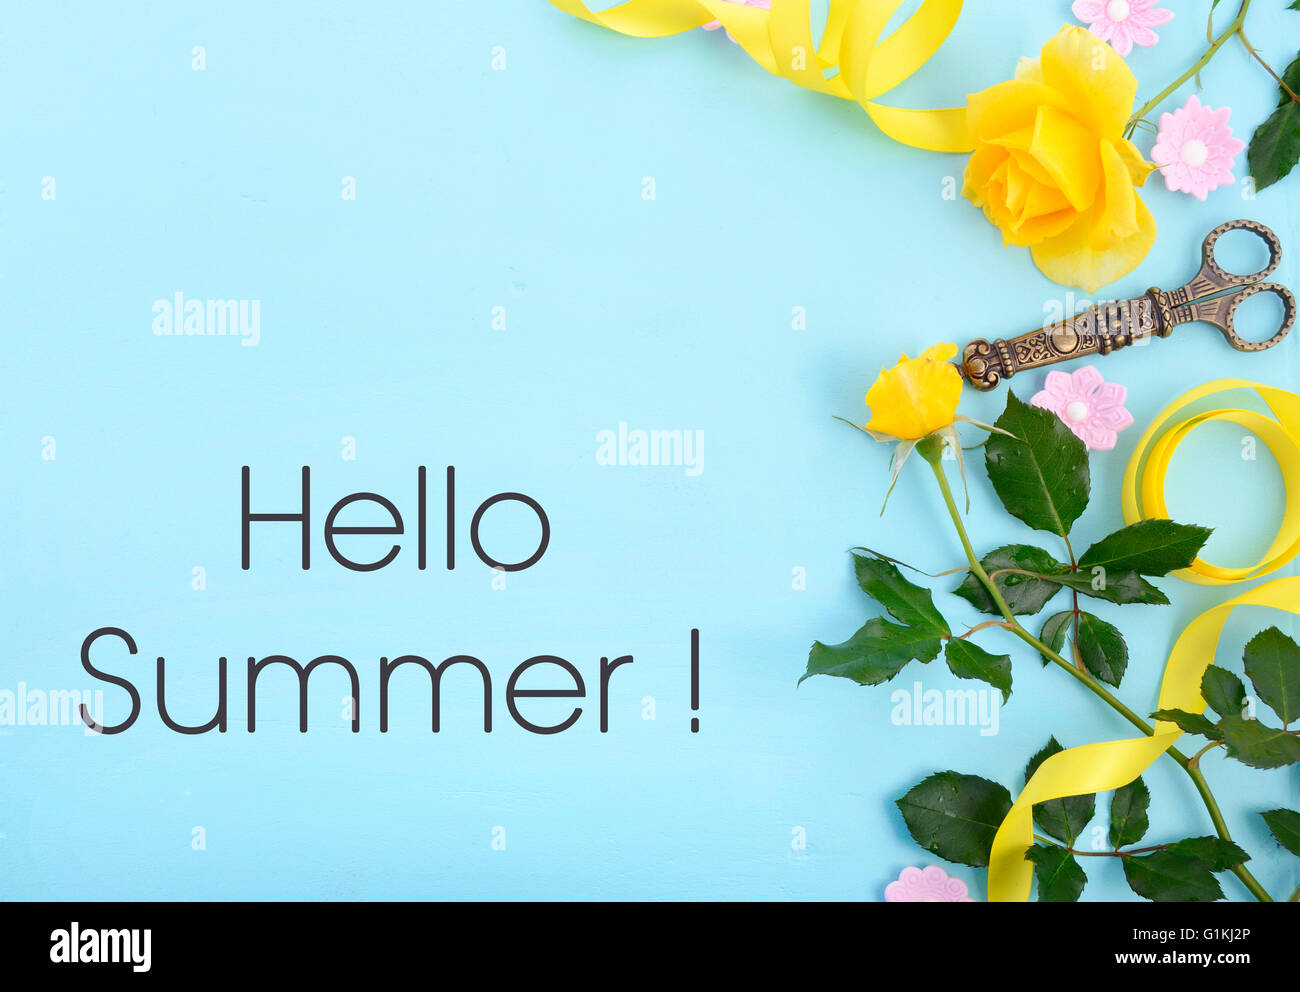 Summertime background with decorated borders of yellow roses, pink candy and yellow ribbon on pale blue wood table, with copy sp Stock Photo